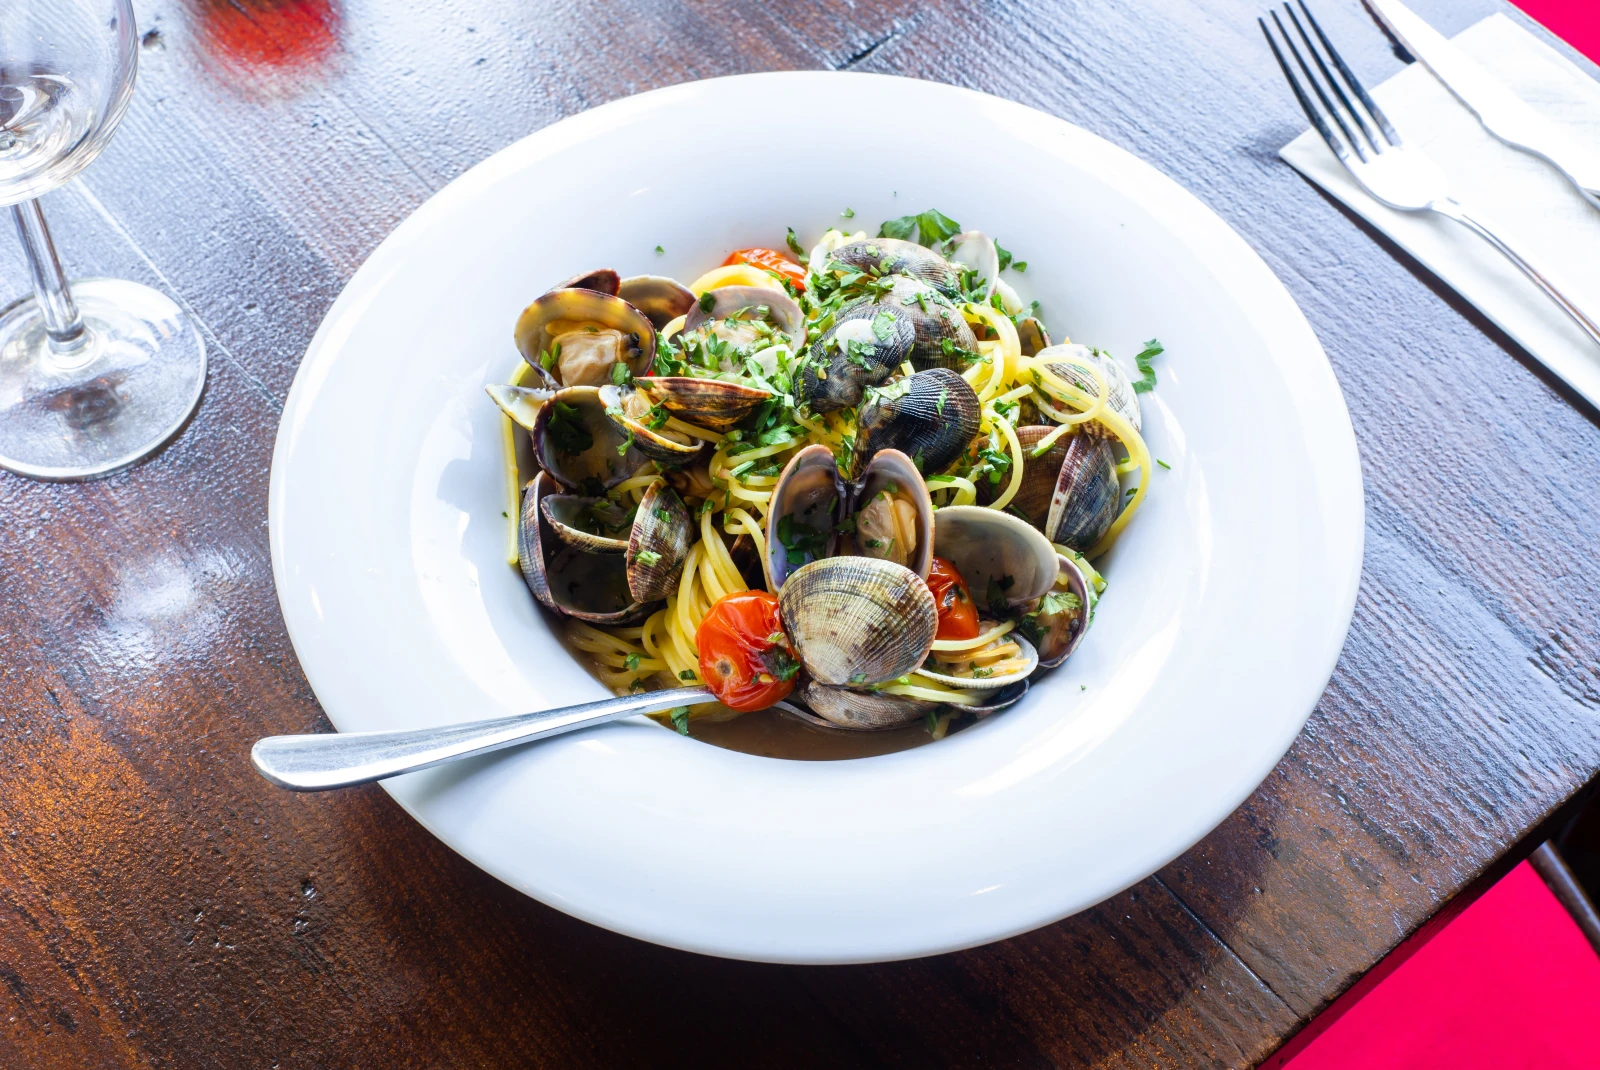 White bowl of pasta and clams on a wooden table with silverware and wine glass